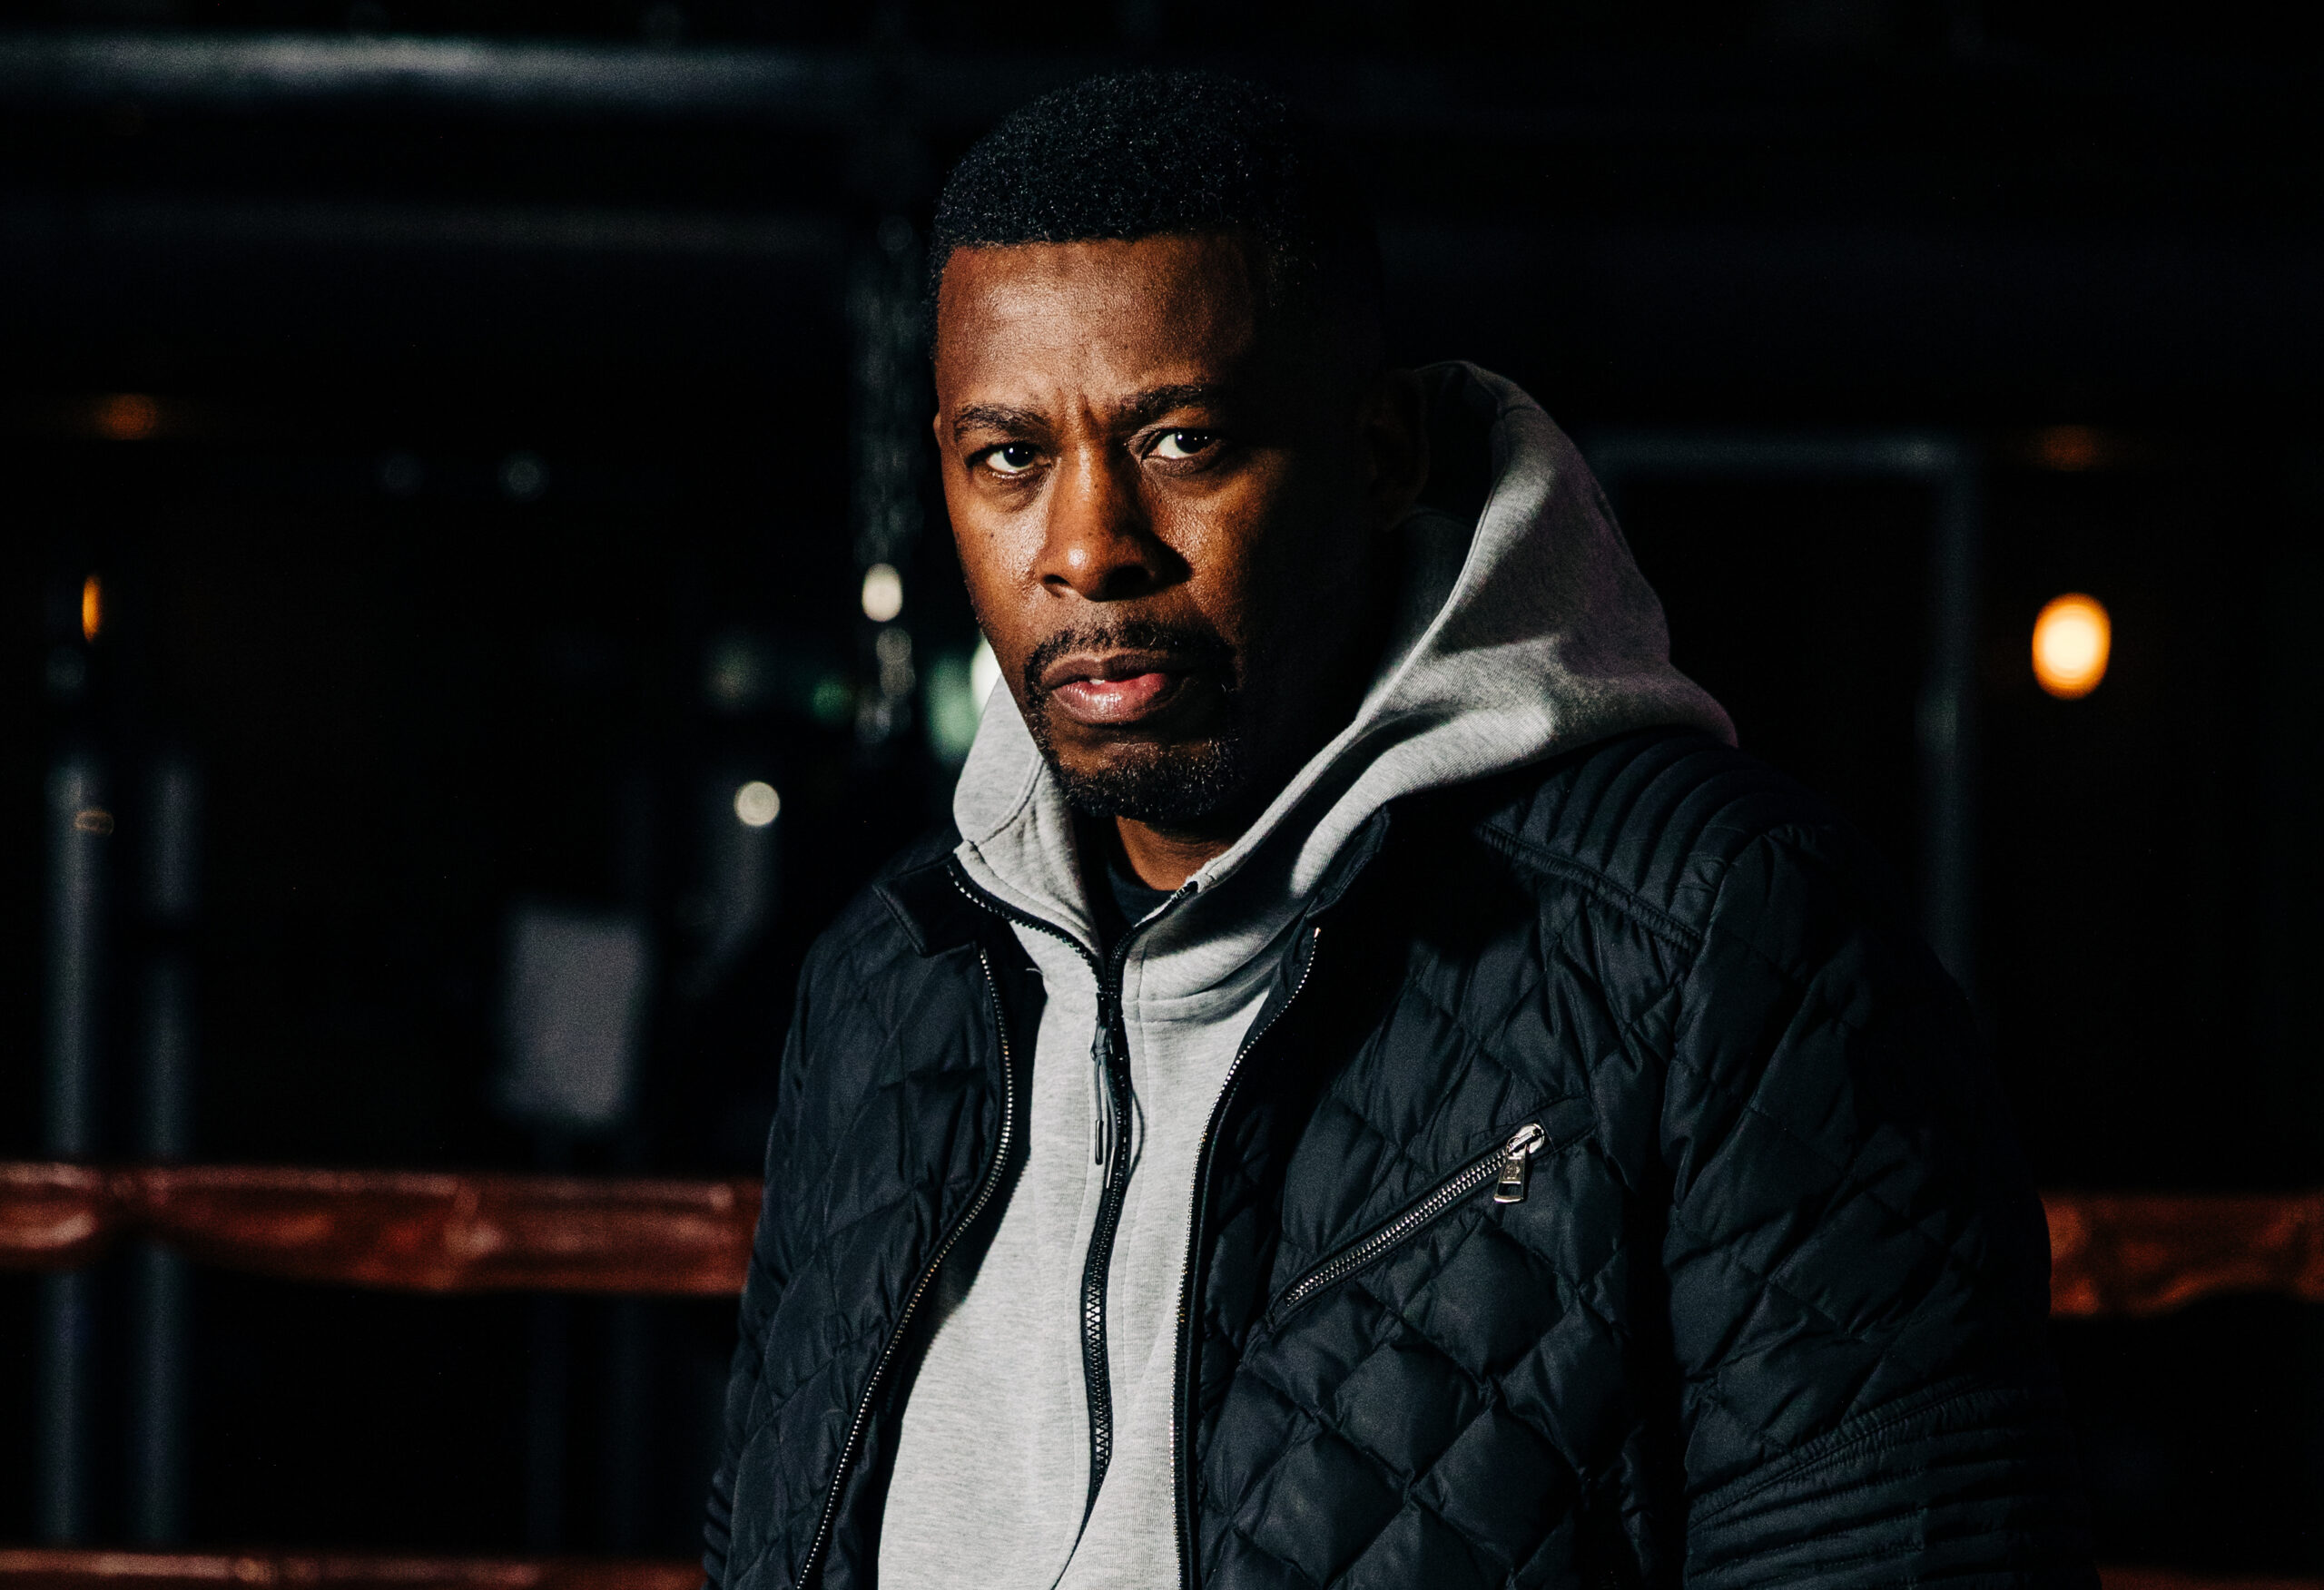 Protect ya king! Wu-Tang Clan's GZA pairs bars and the board in